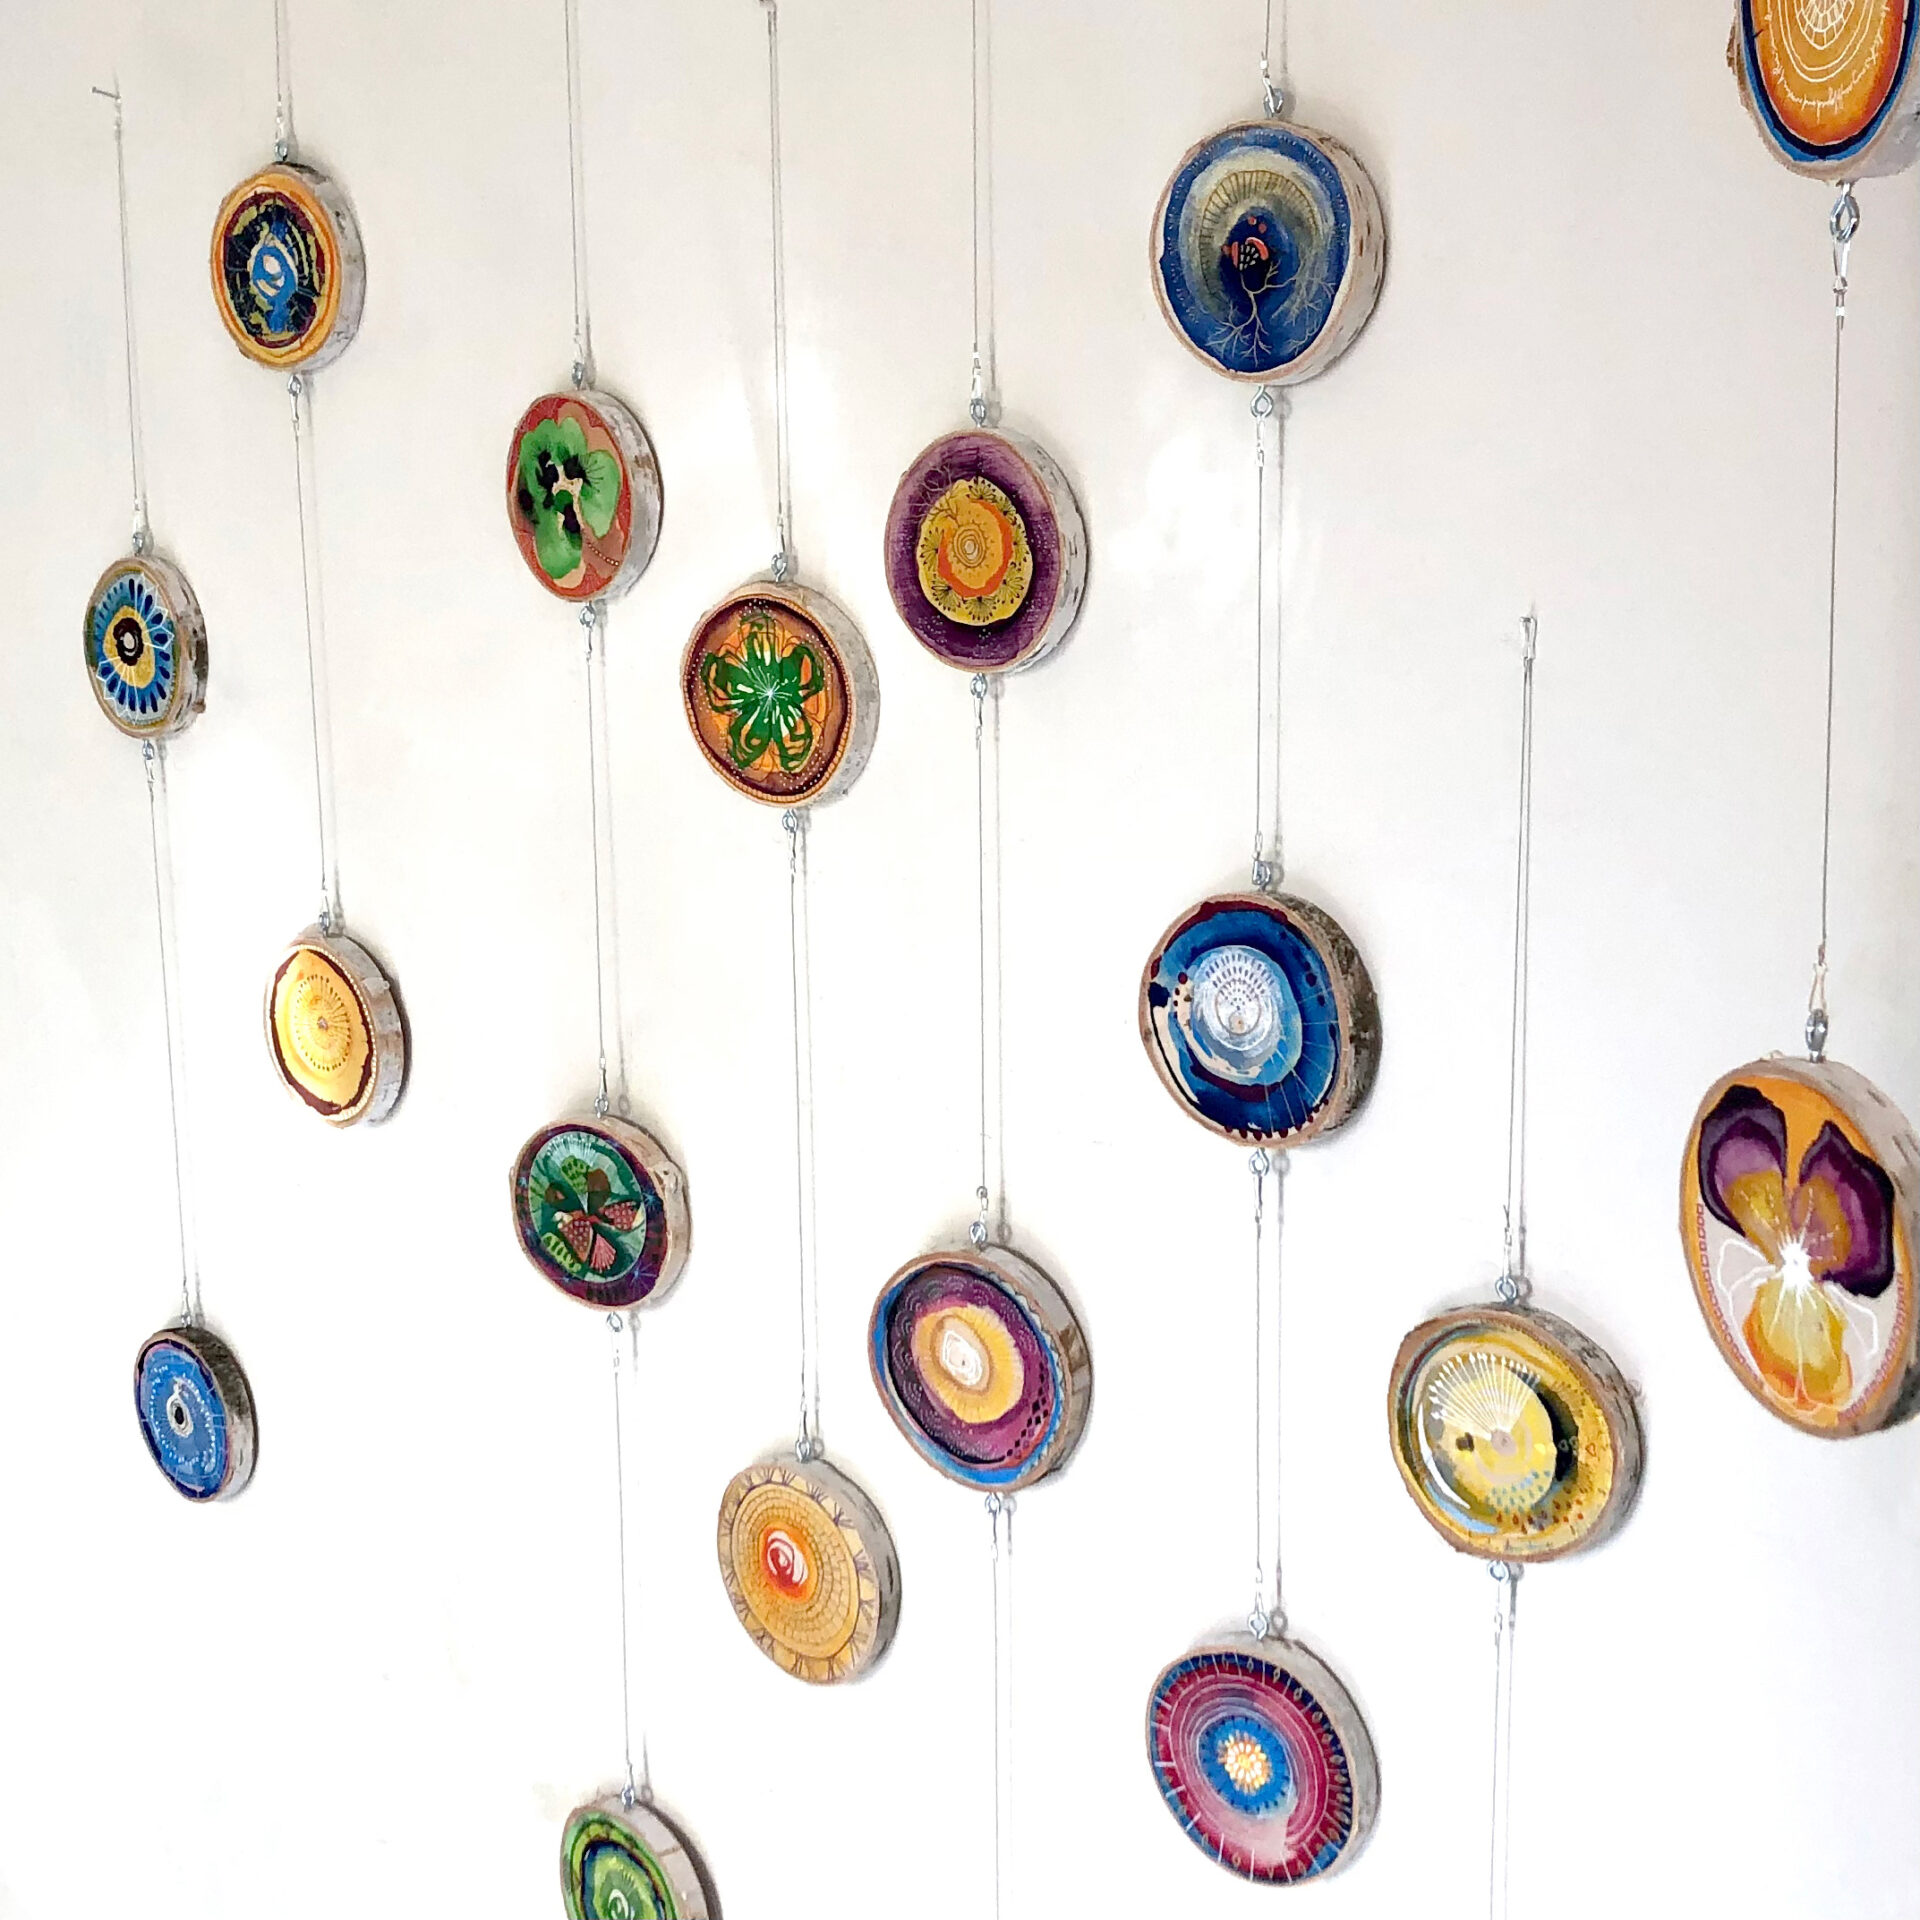 Installation of small circular paintings on birch rounds